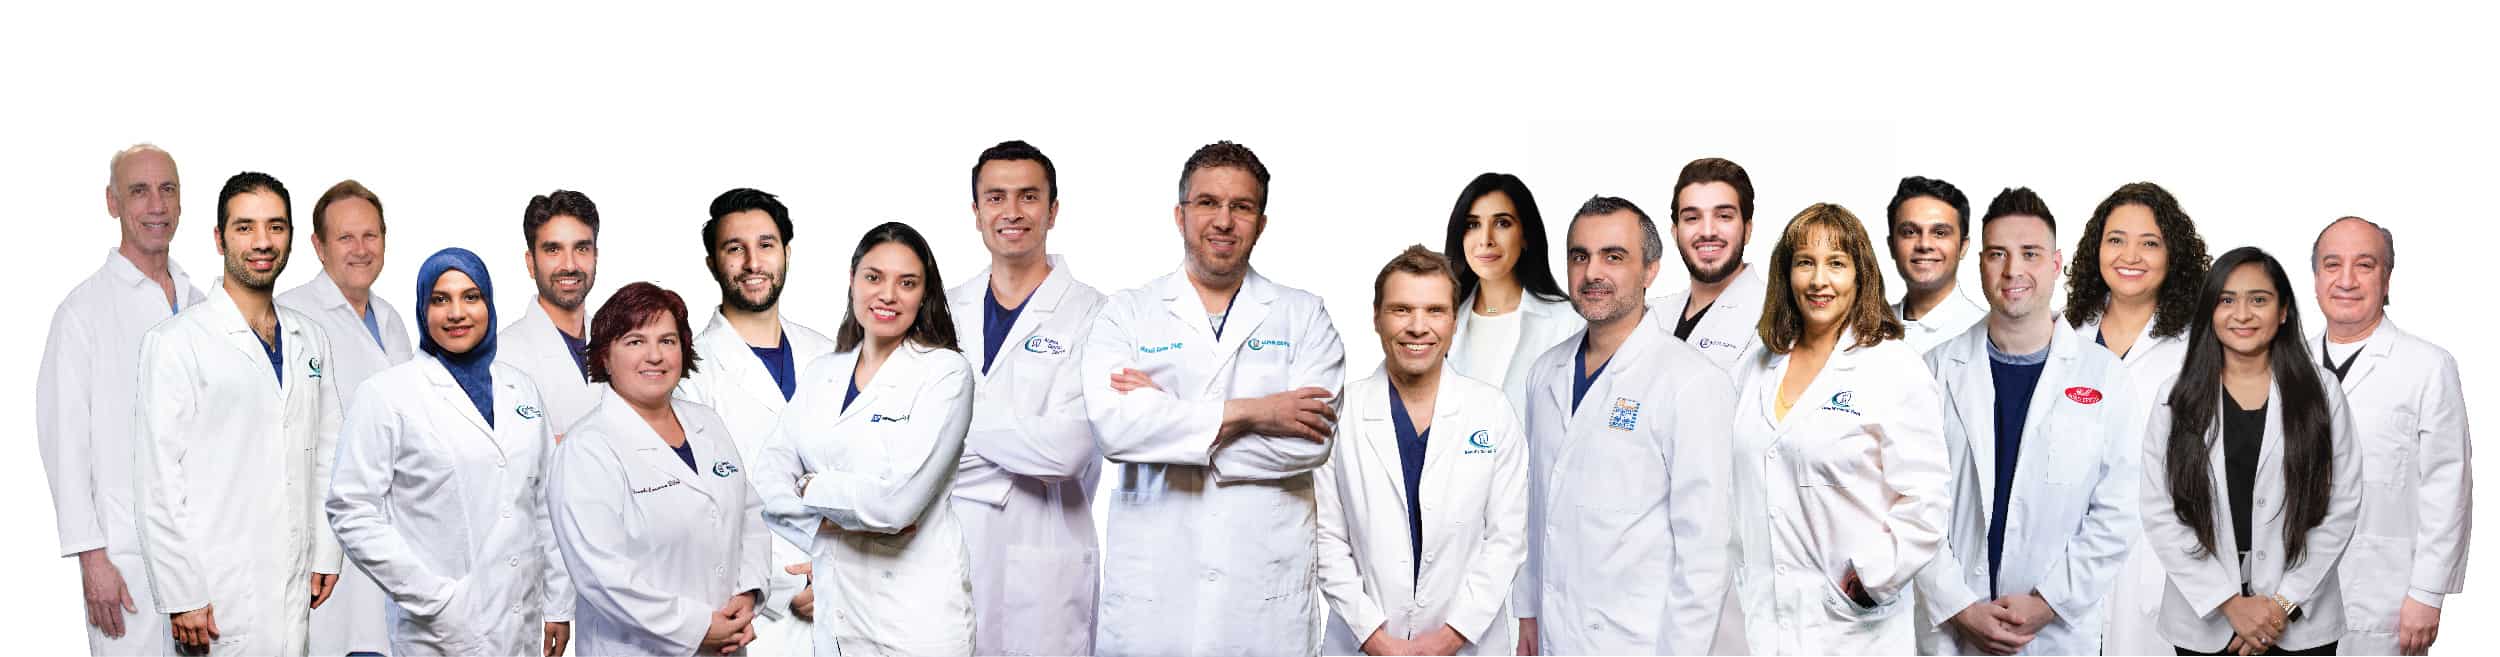 Group picture of the Doctors